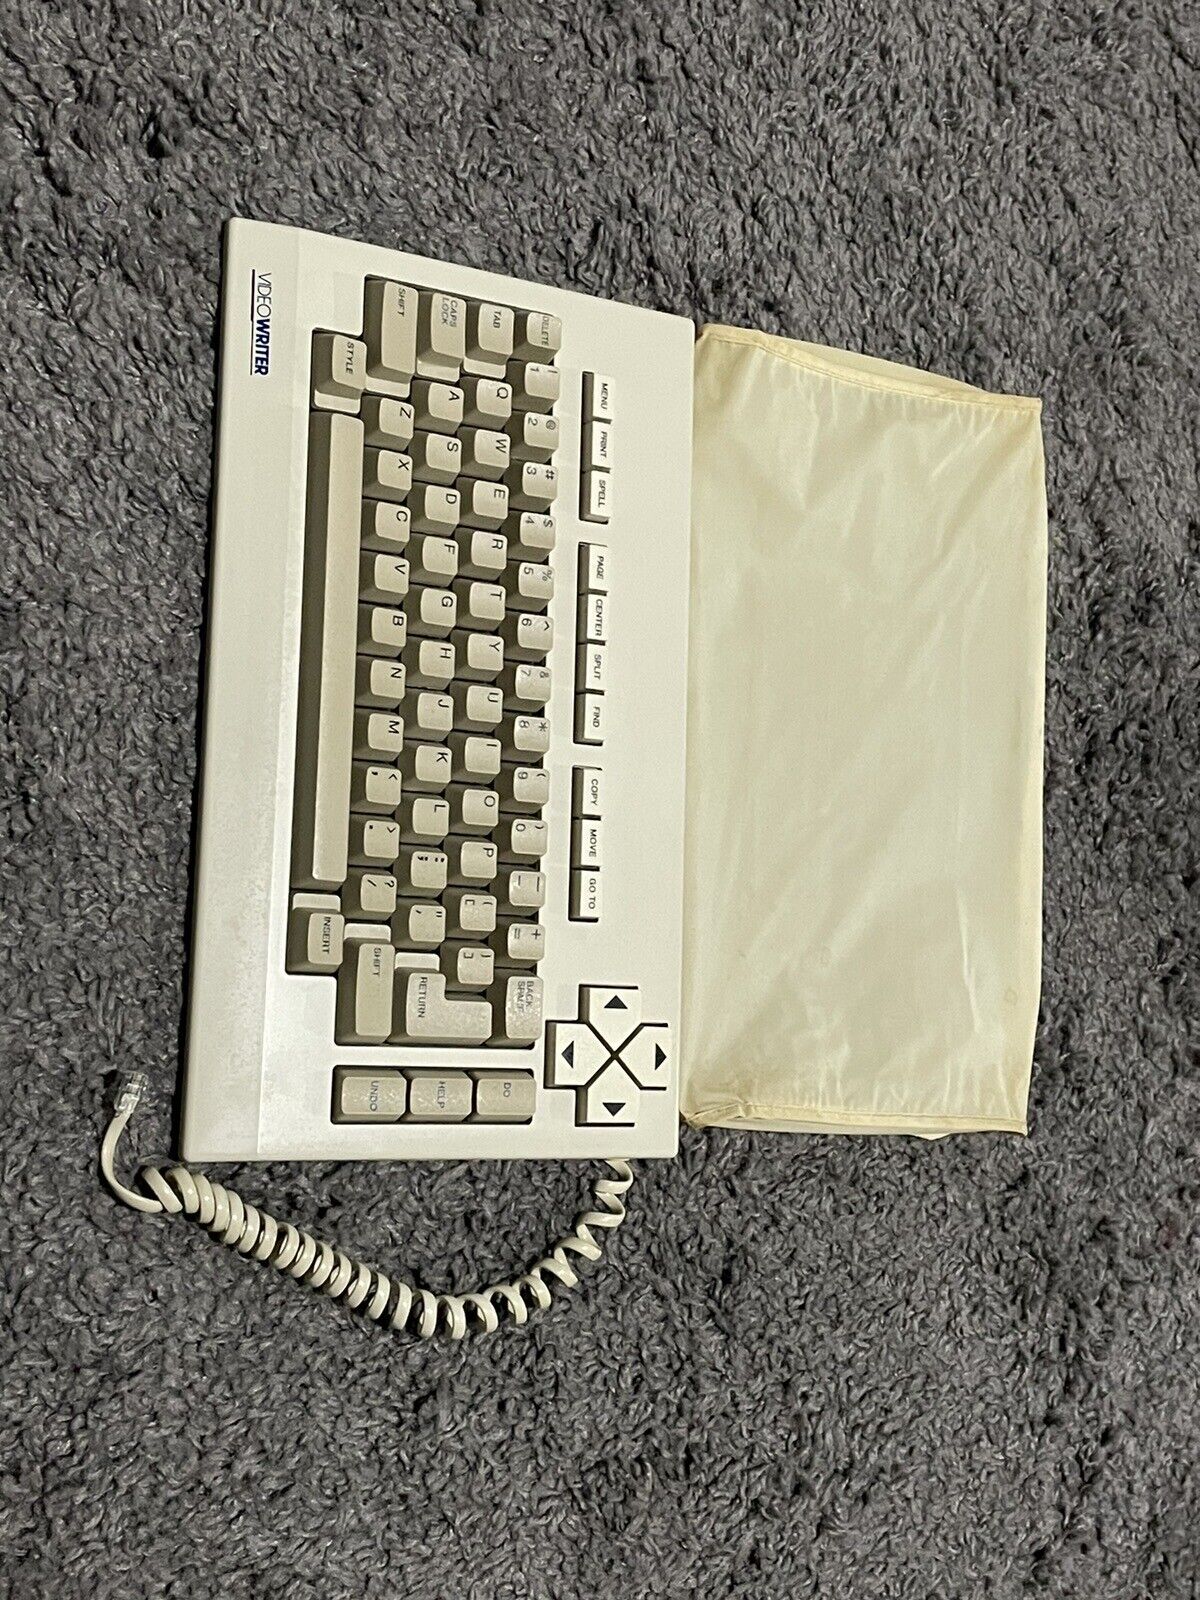 Vintage 1986 Magnavox VideoWriter Keyboard Video Writer w/ Dust Cover - Tested